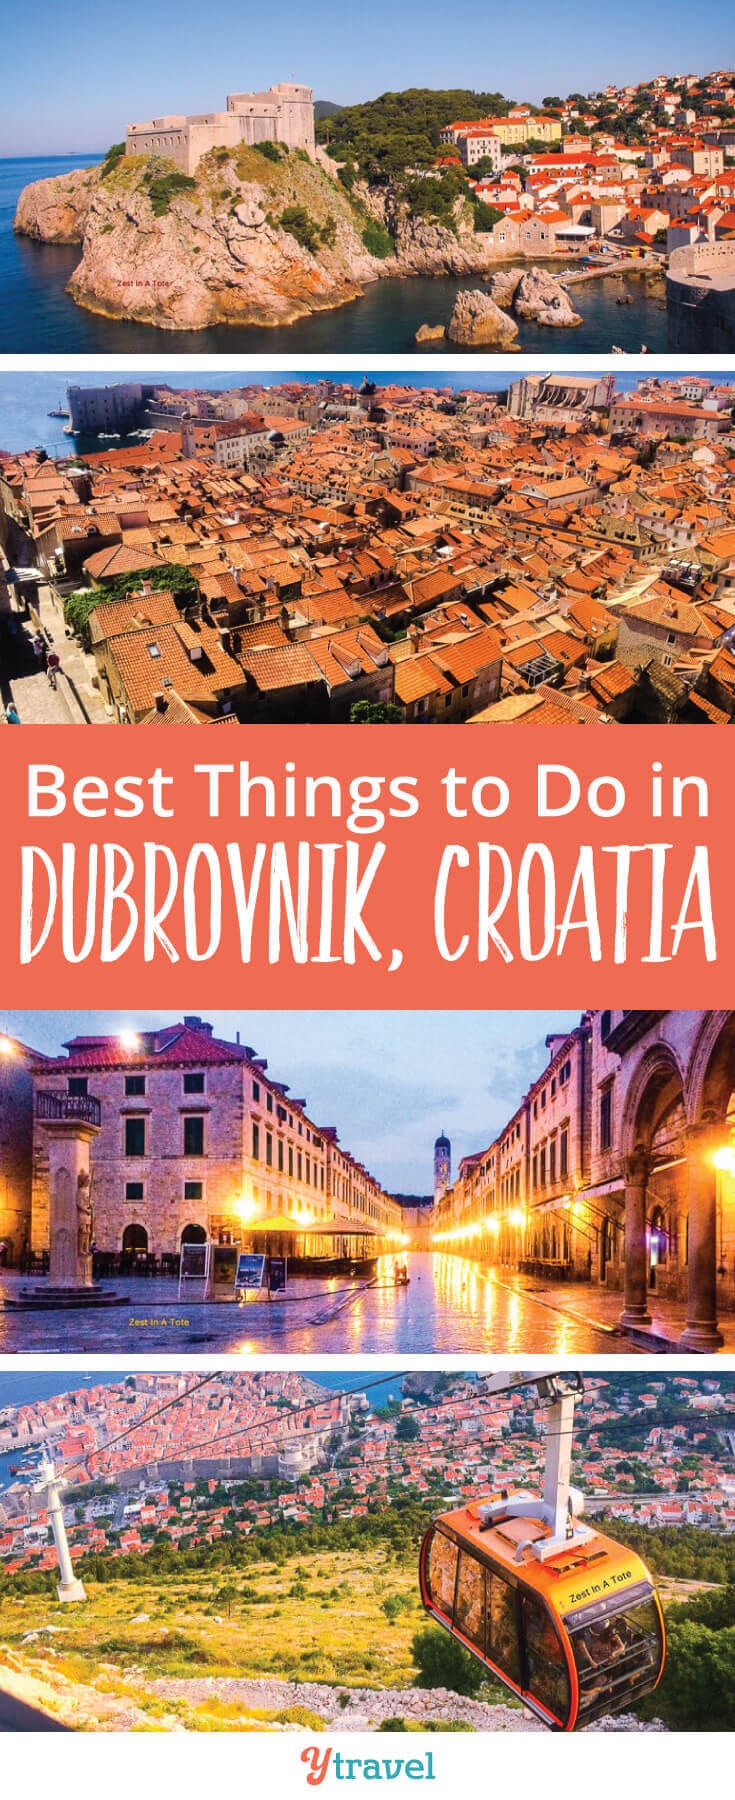 Best things to do in Dubrovnik, Croatia. Tips on what to see and do, where to eat and stay.